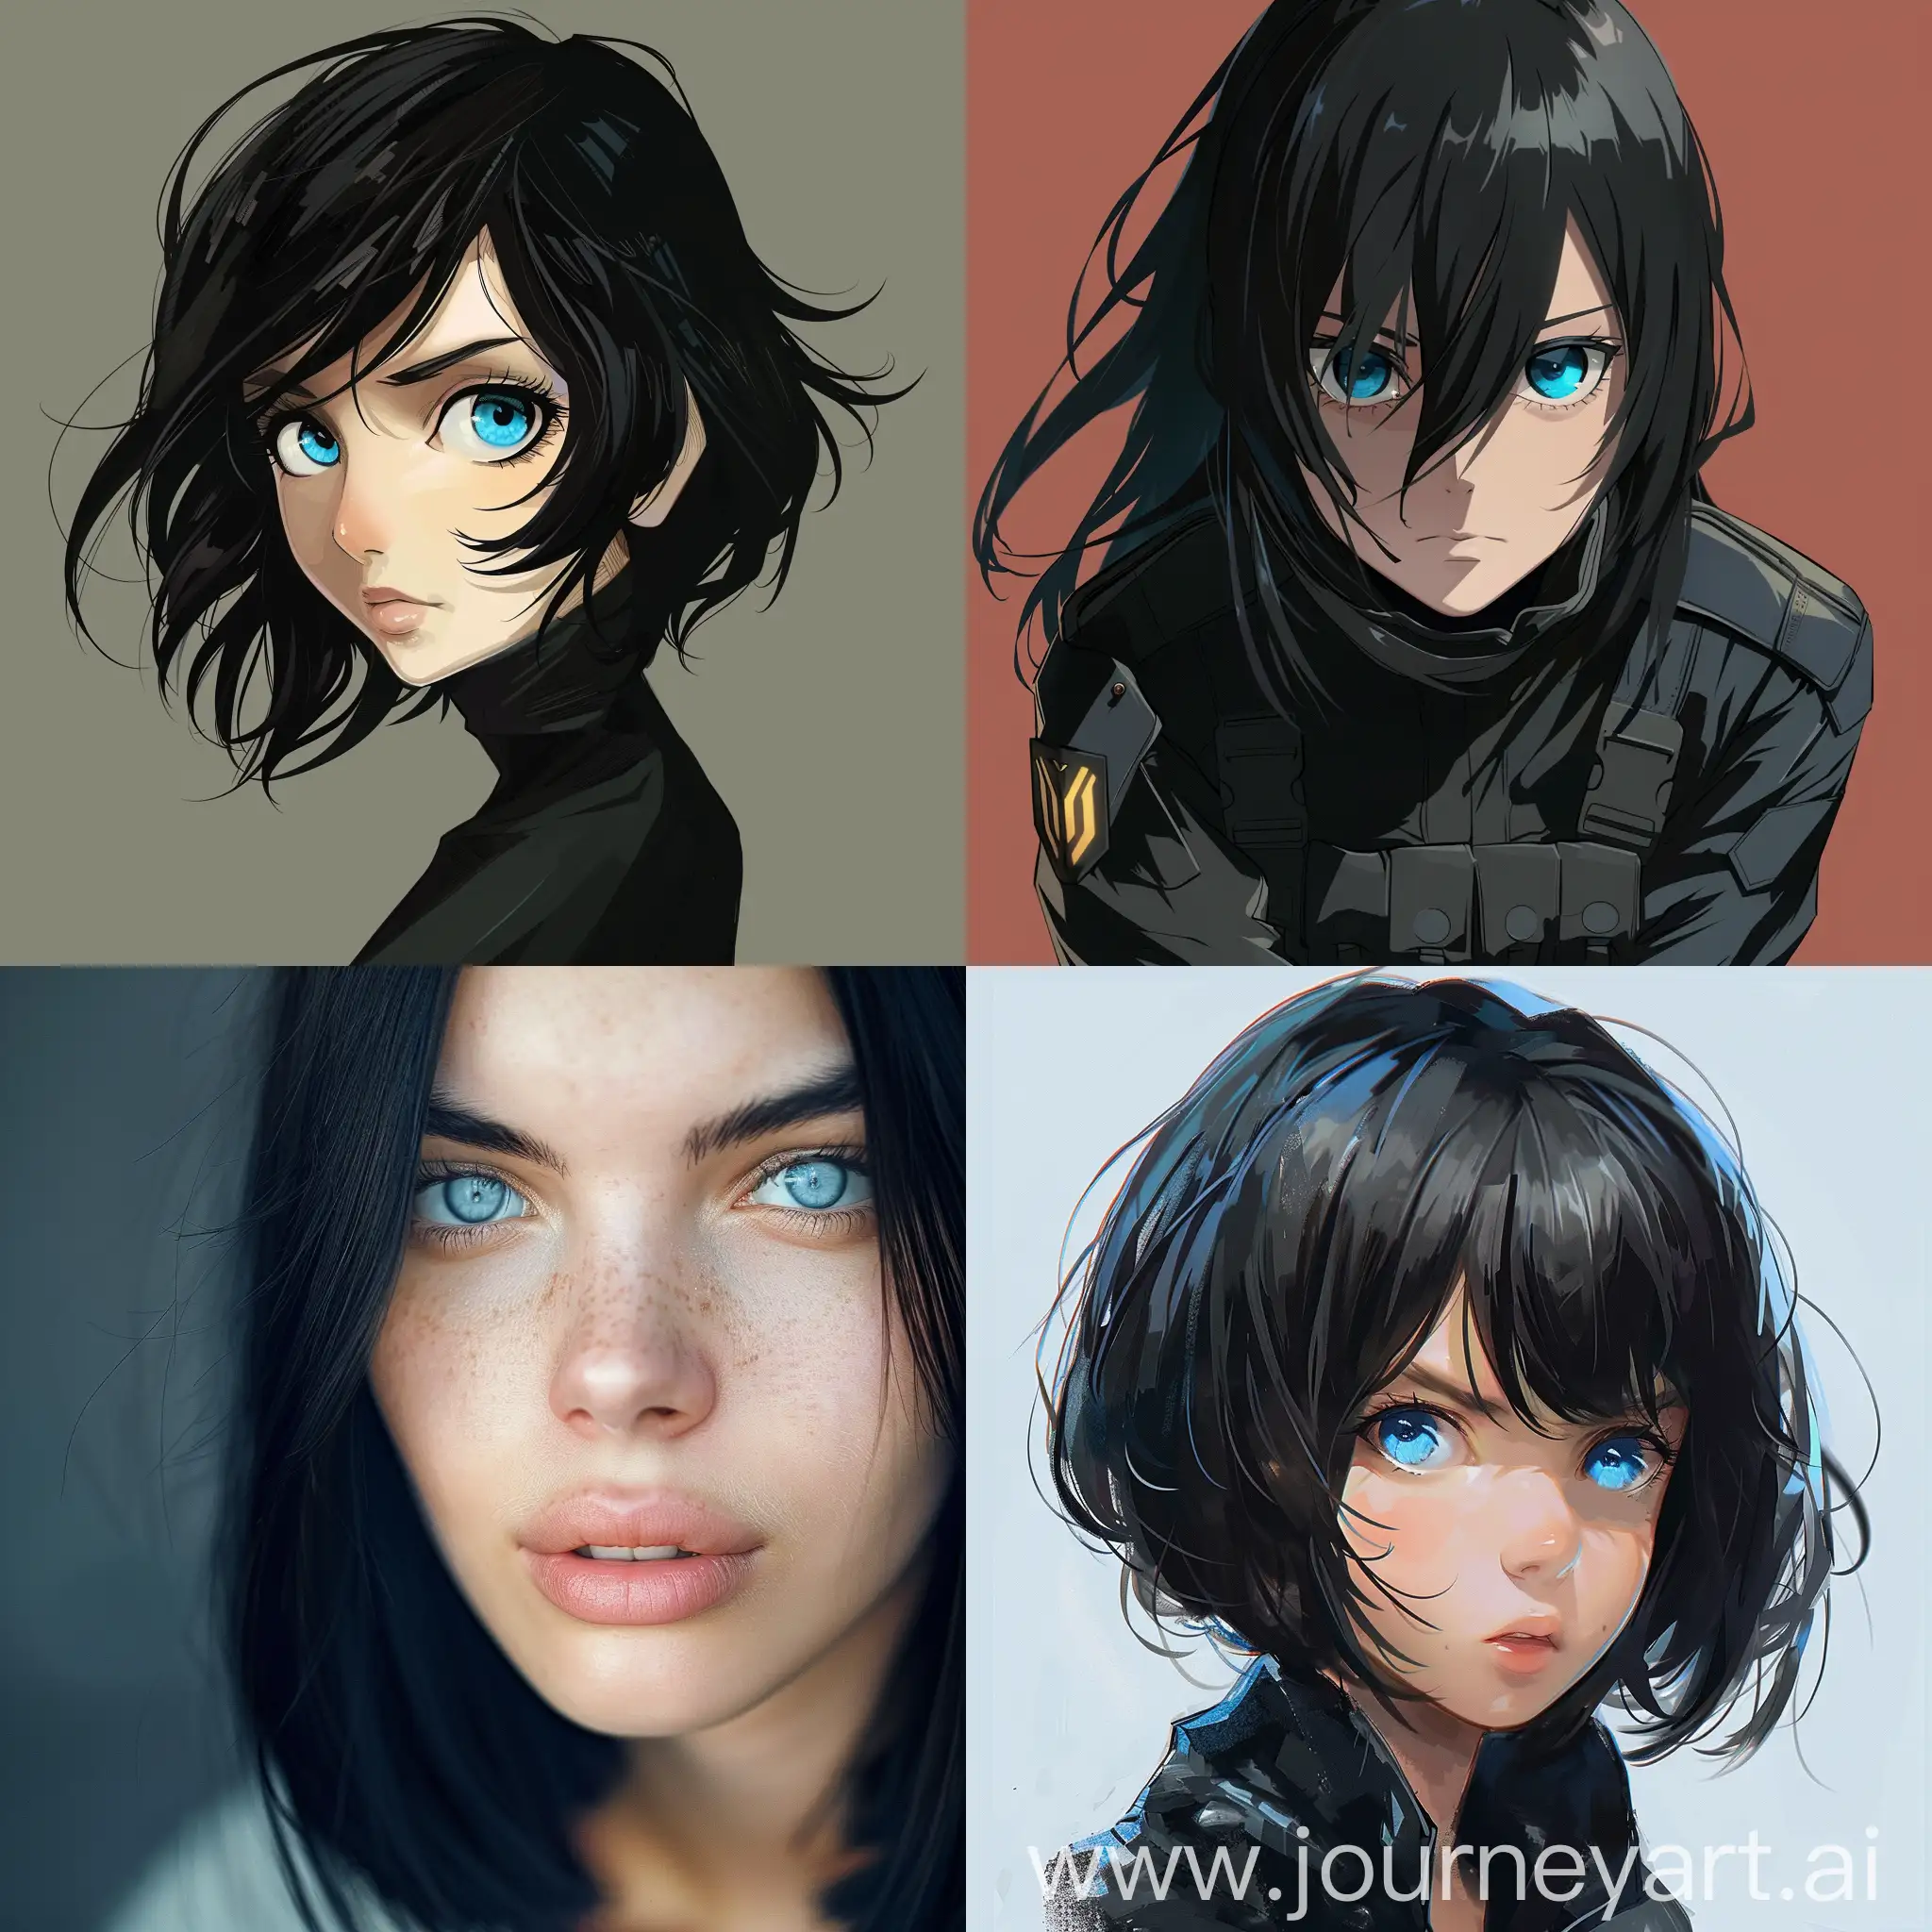 Adventurous-BlackHaired-Girl-Agent-with-Blue-Eyes